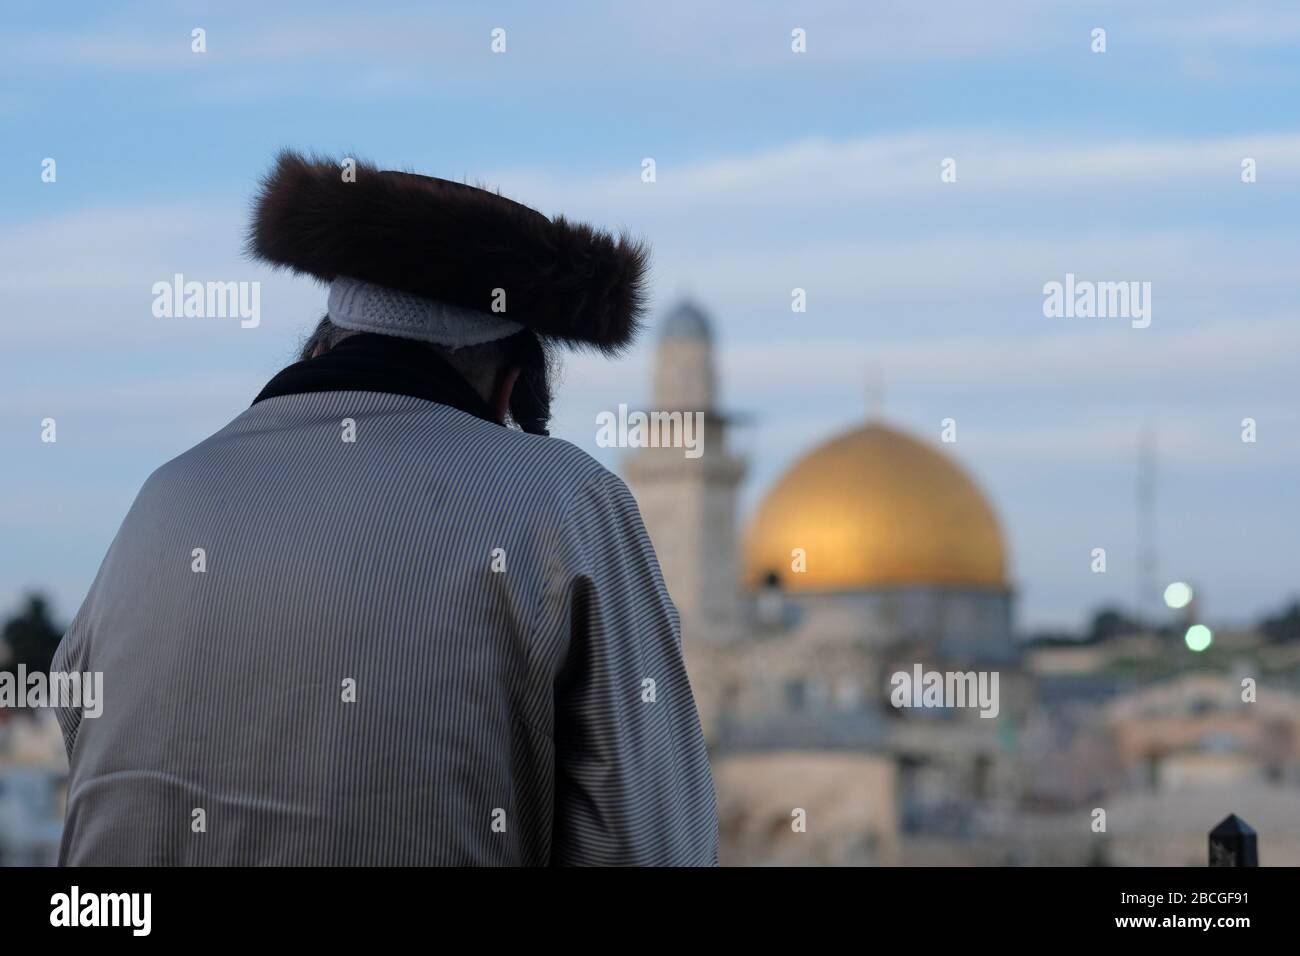 A Hasidic Jew wearing a shtreimel a fur hat worn by many married Haredi Jewish men looks at the Dome of the Rock an Islamic shrine located on the Temple Mount known to Muslims as the Haram esh-Sharif in the Old City East Jerusalem Israel Stock Photo